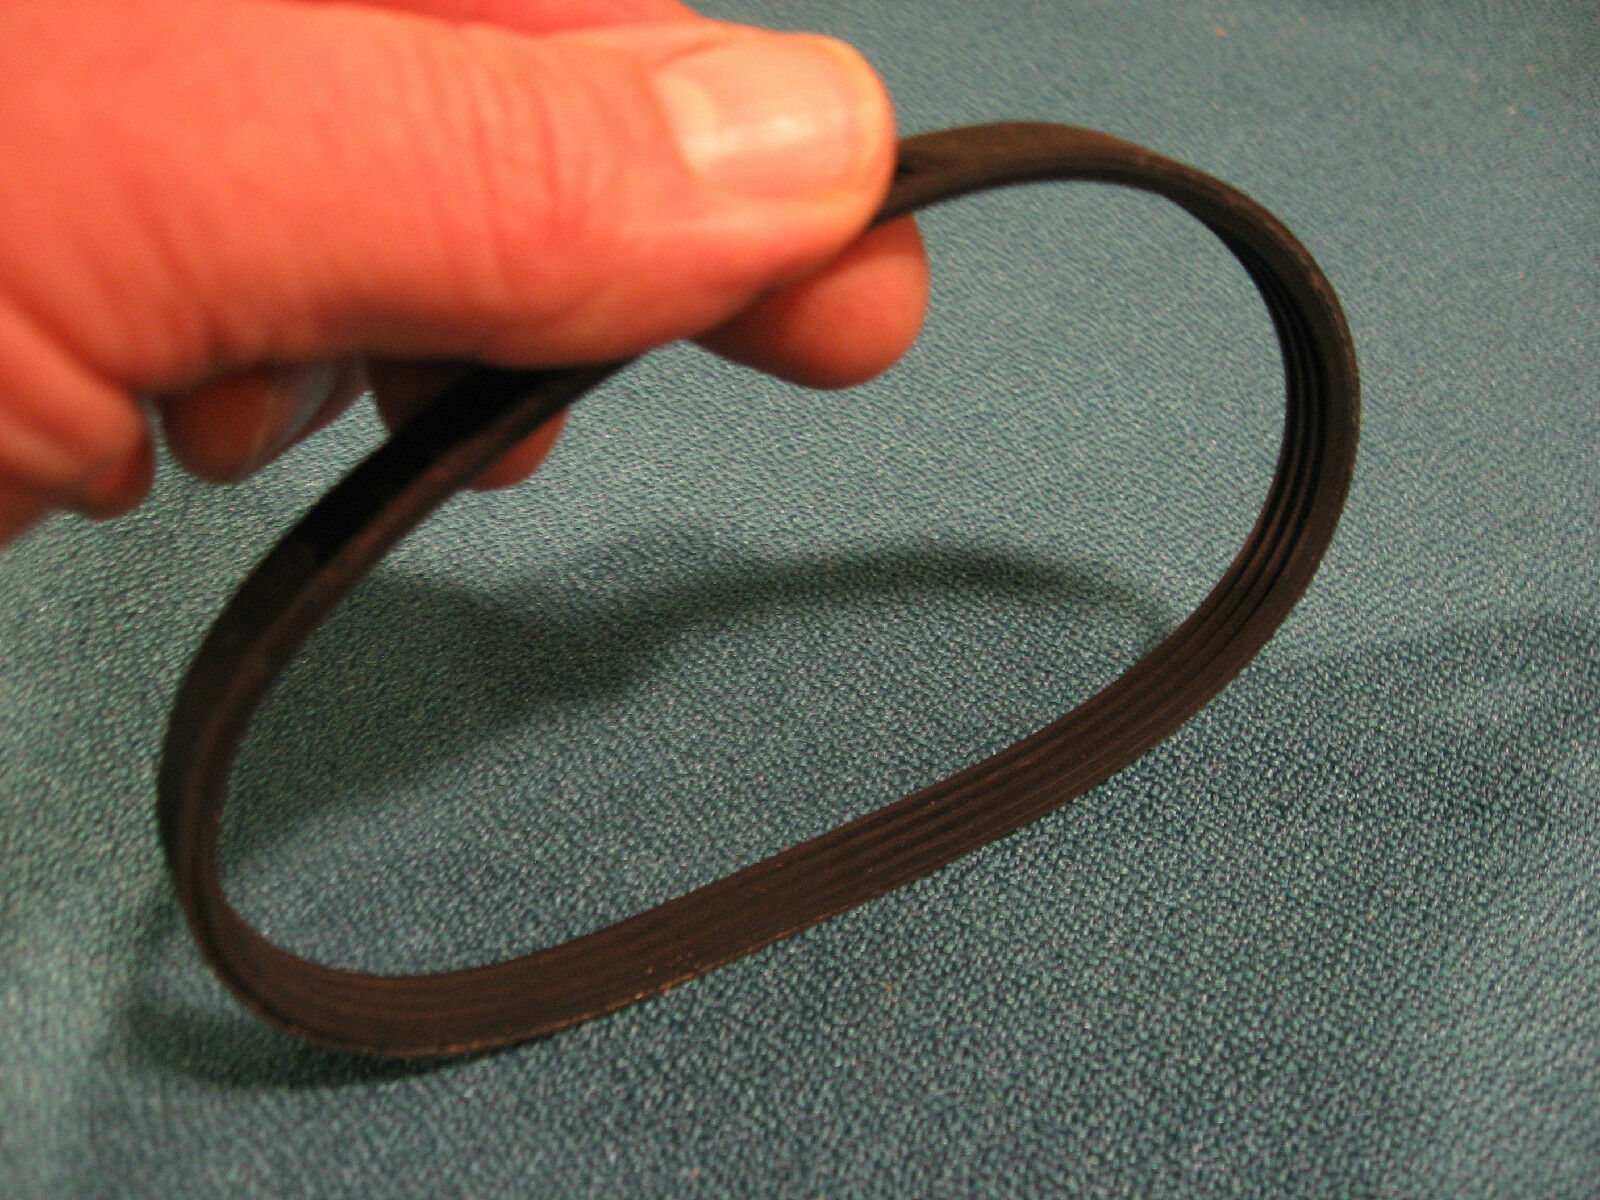 New Drive Belt Made In Usa For Sears Craftsman Bandsaw Model 119.214000 Band Saw